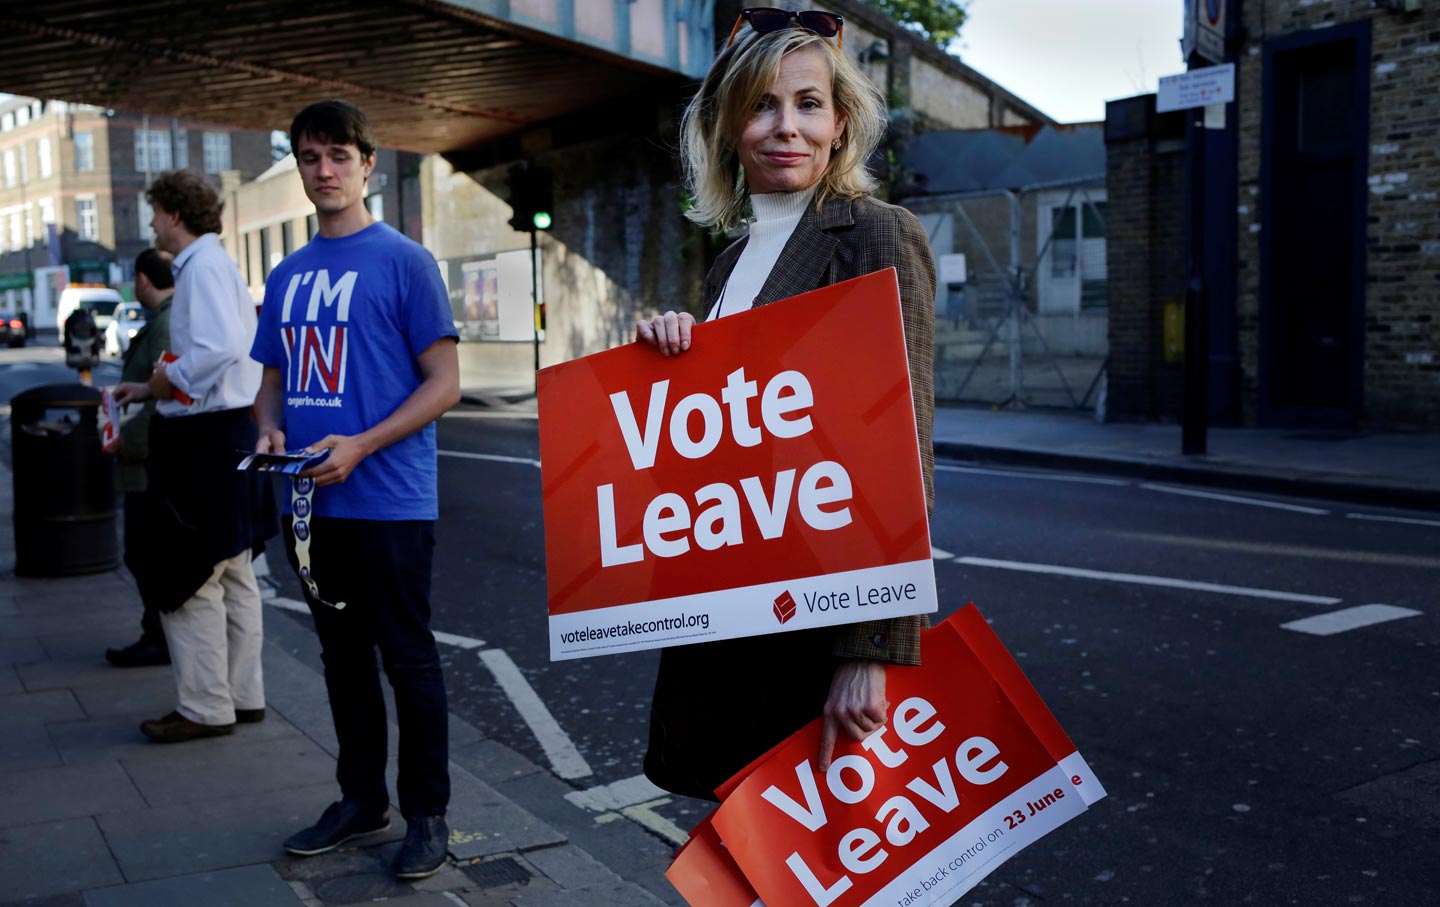 Disgust With Elites and Fear of Others Drove the Brexit Vote